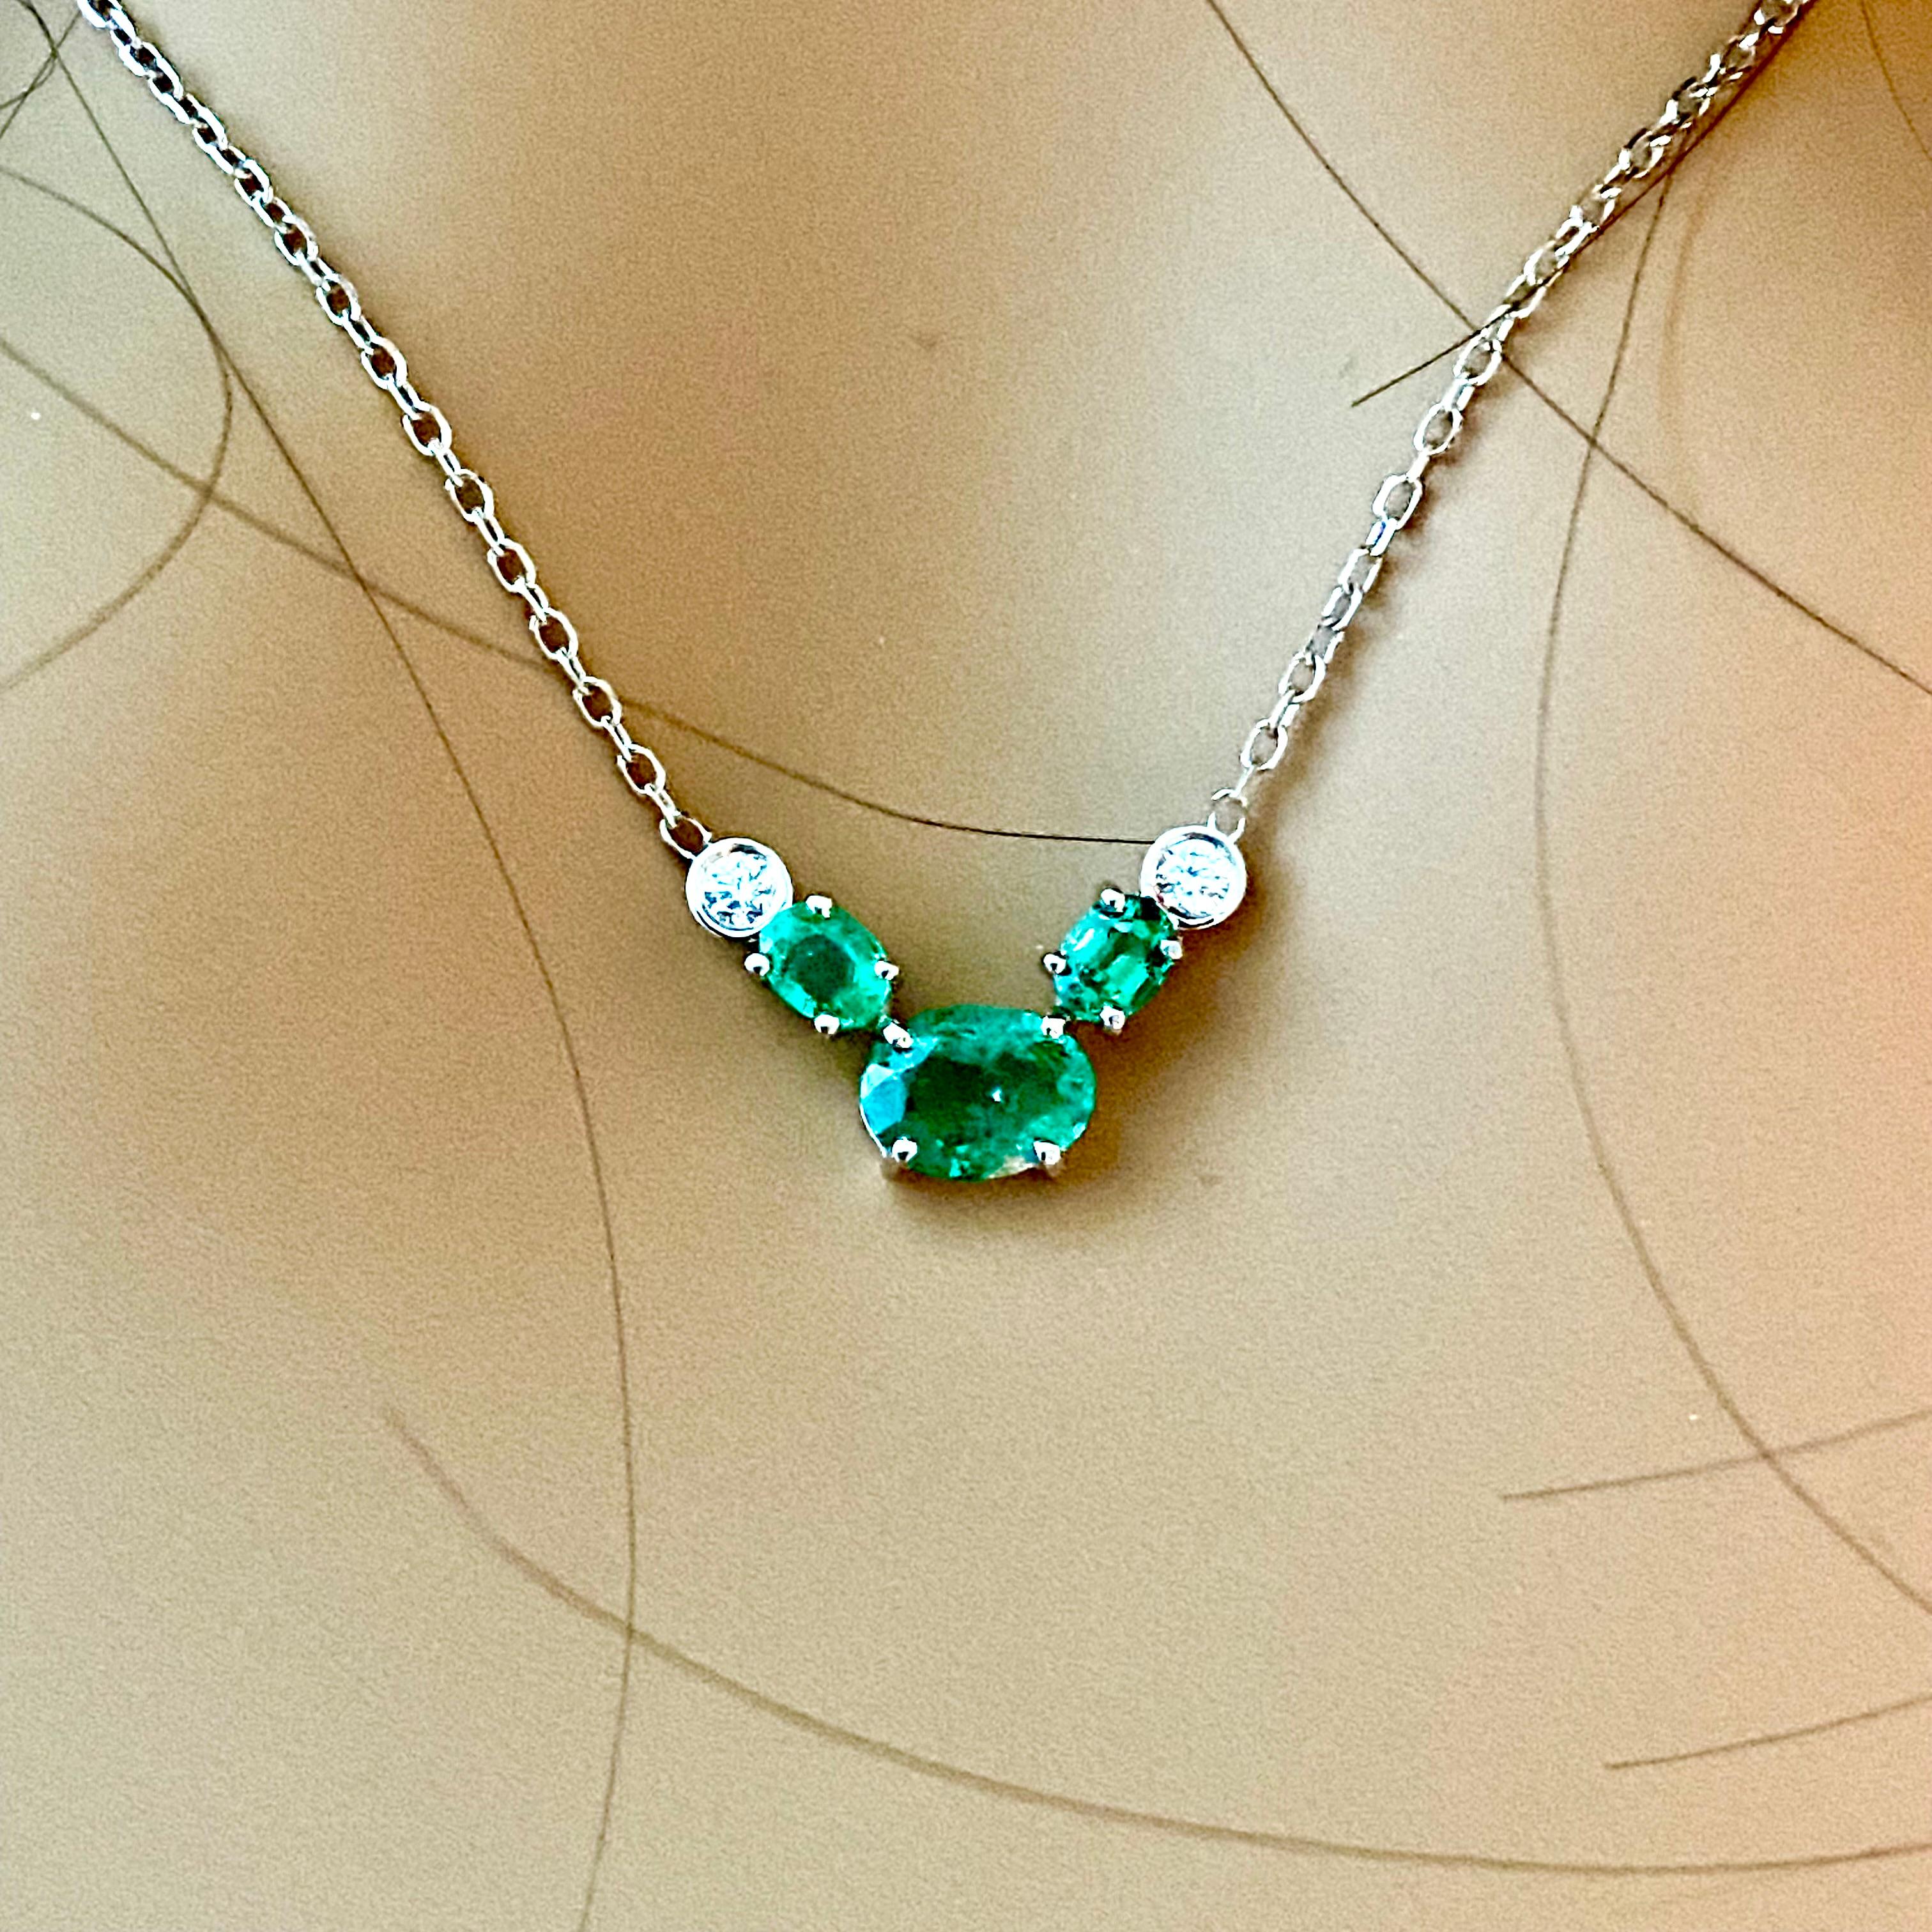 Fourteen karats white gold necklace pendant with emerald
Necklace measuring 16.80 inch and 0.45 inch wide
Oval-shaped emerald weighing 0.80 carats set in white gold setting 
Two oval emeralds weighing 0.50 carats set in white gold setting 
Two round